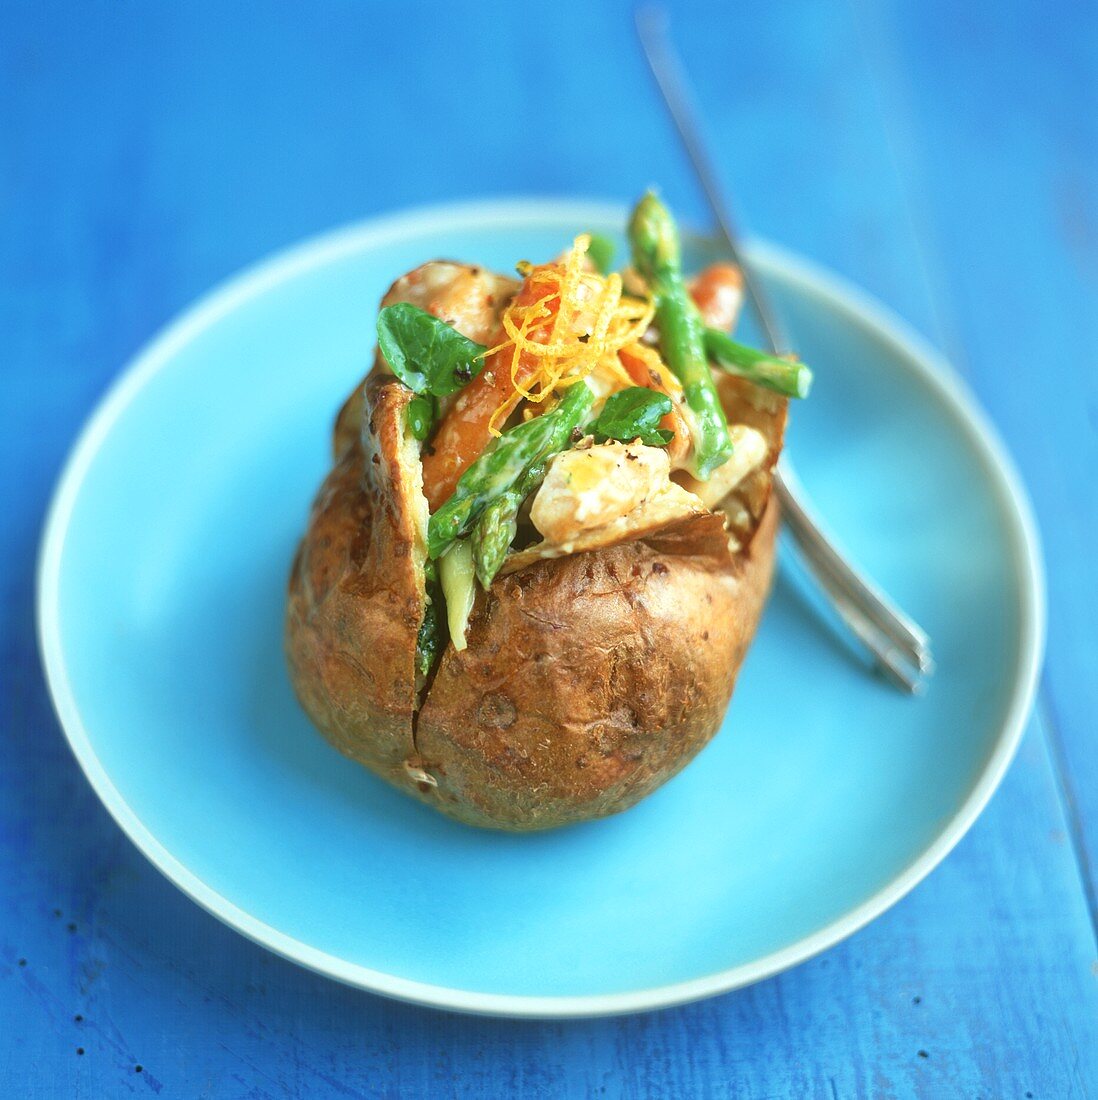 Baked potatoes, filled with asparagus and carrot salad